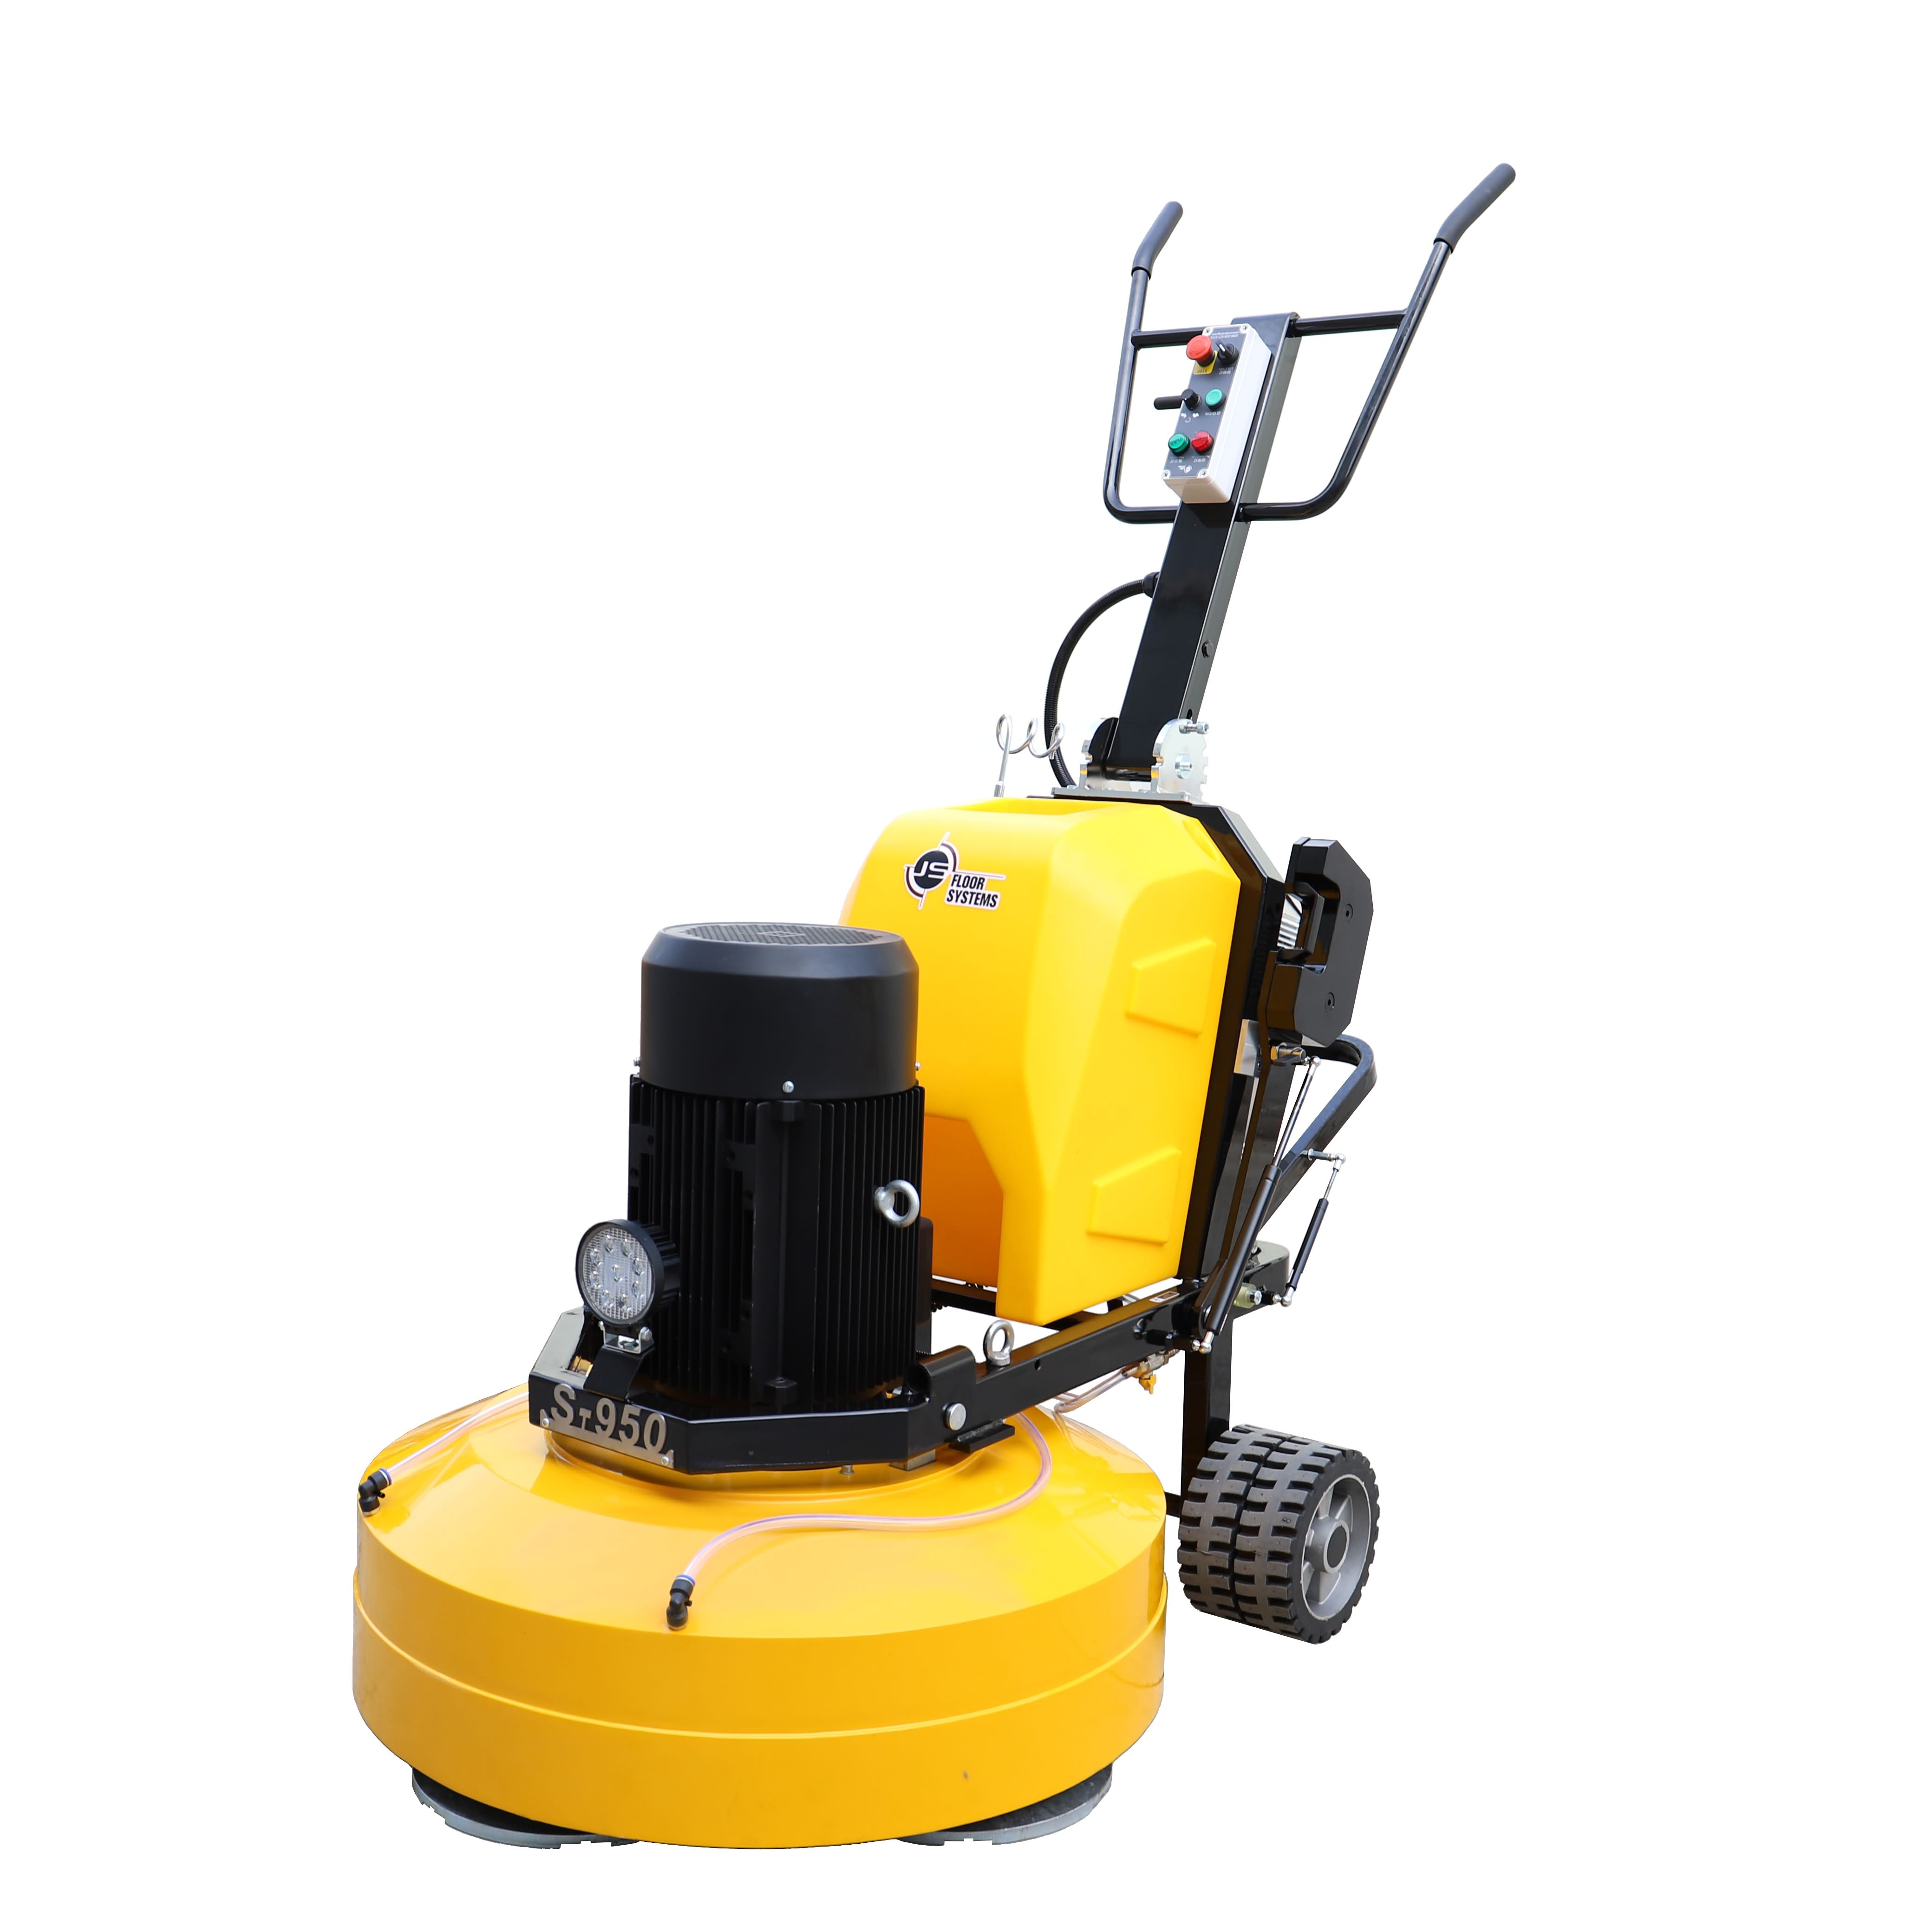 CE Approved Diamond Concrete Floor Grinding Machine Polishing Grinder For Concrete Surface Featured Image